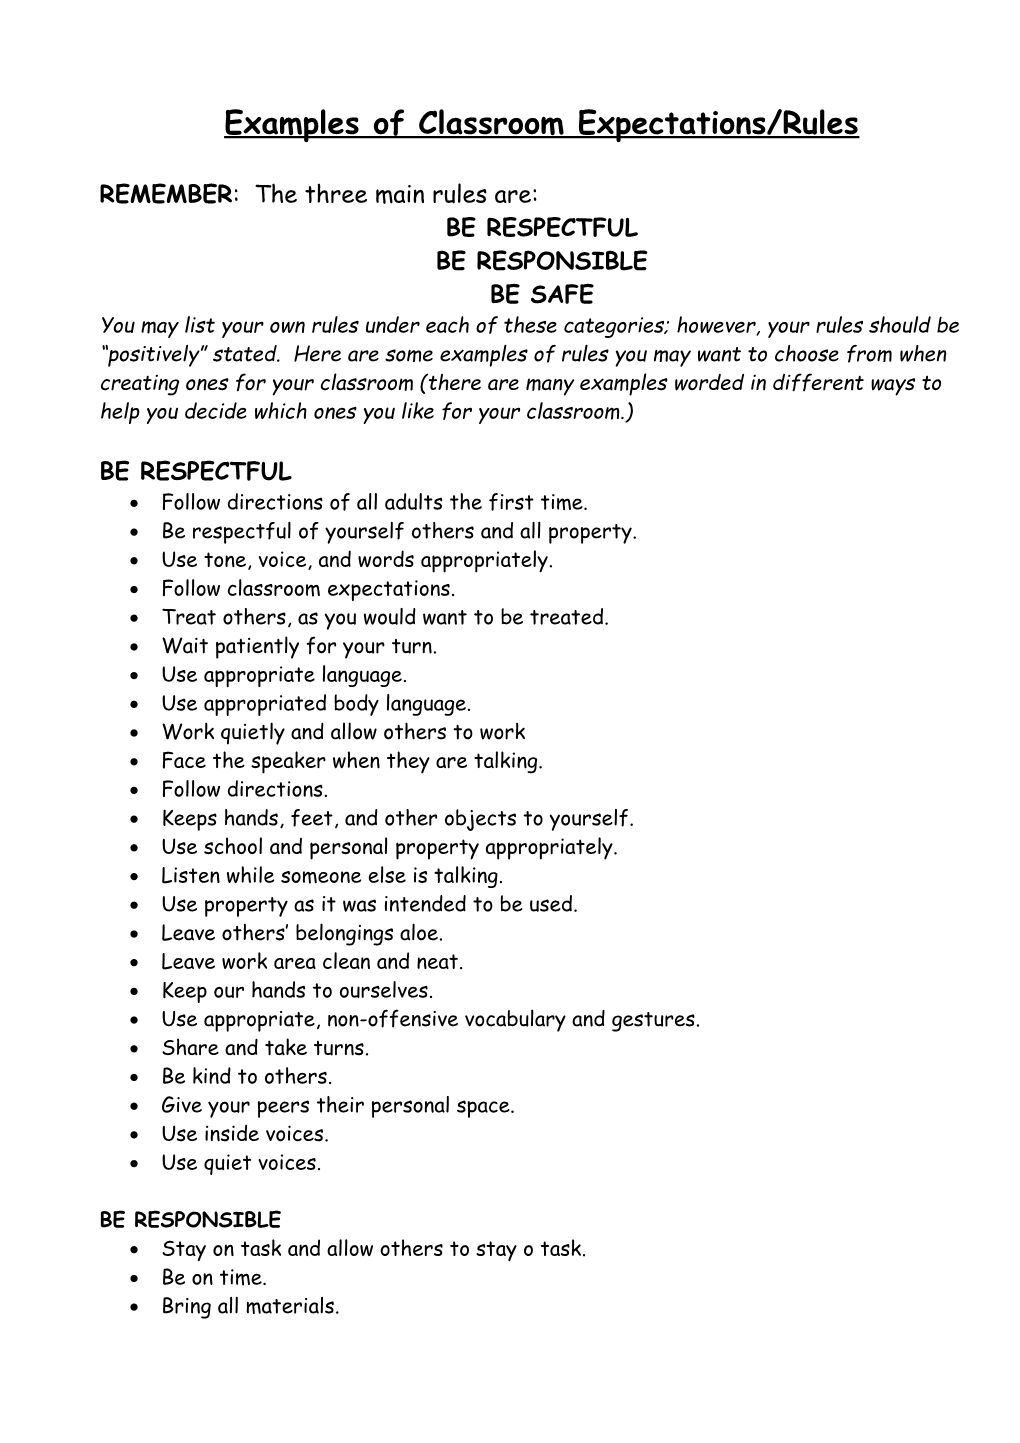 Examples of Classroom Expectations/Rules the SWPBS